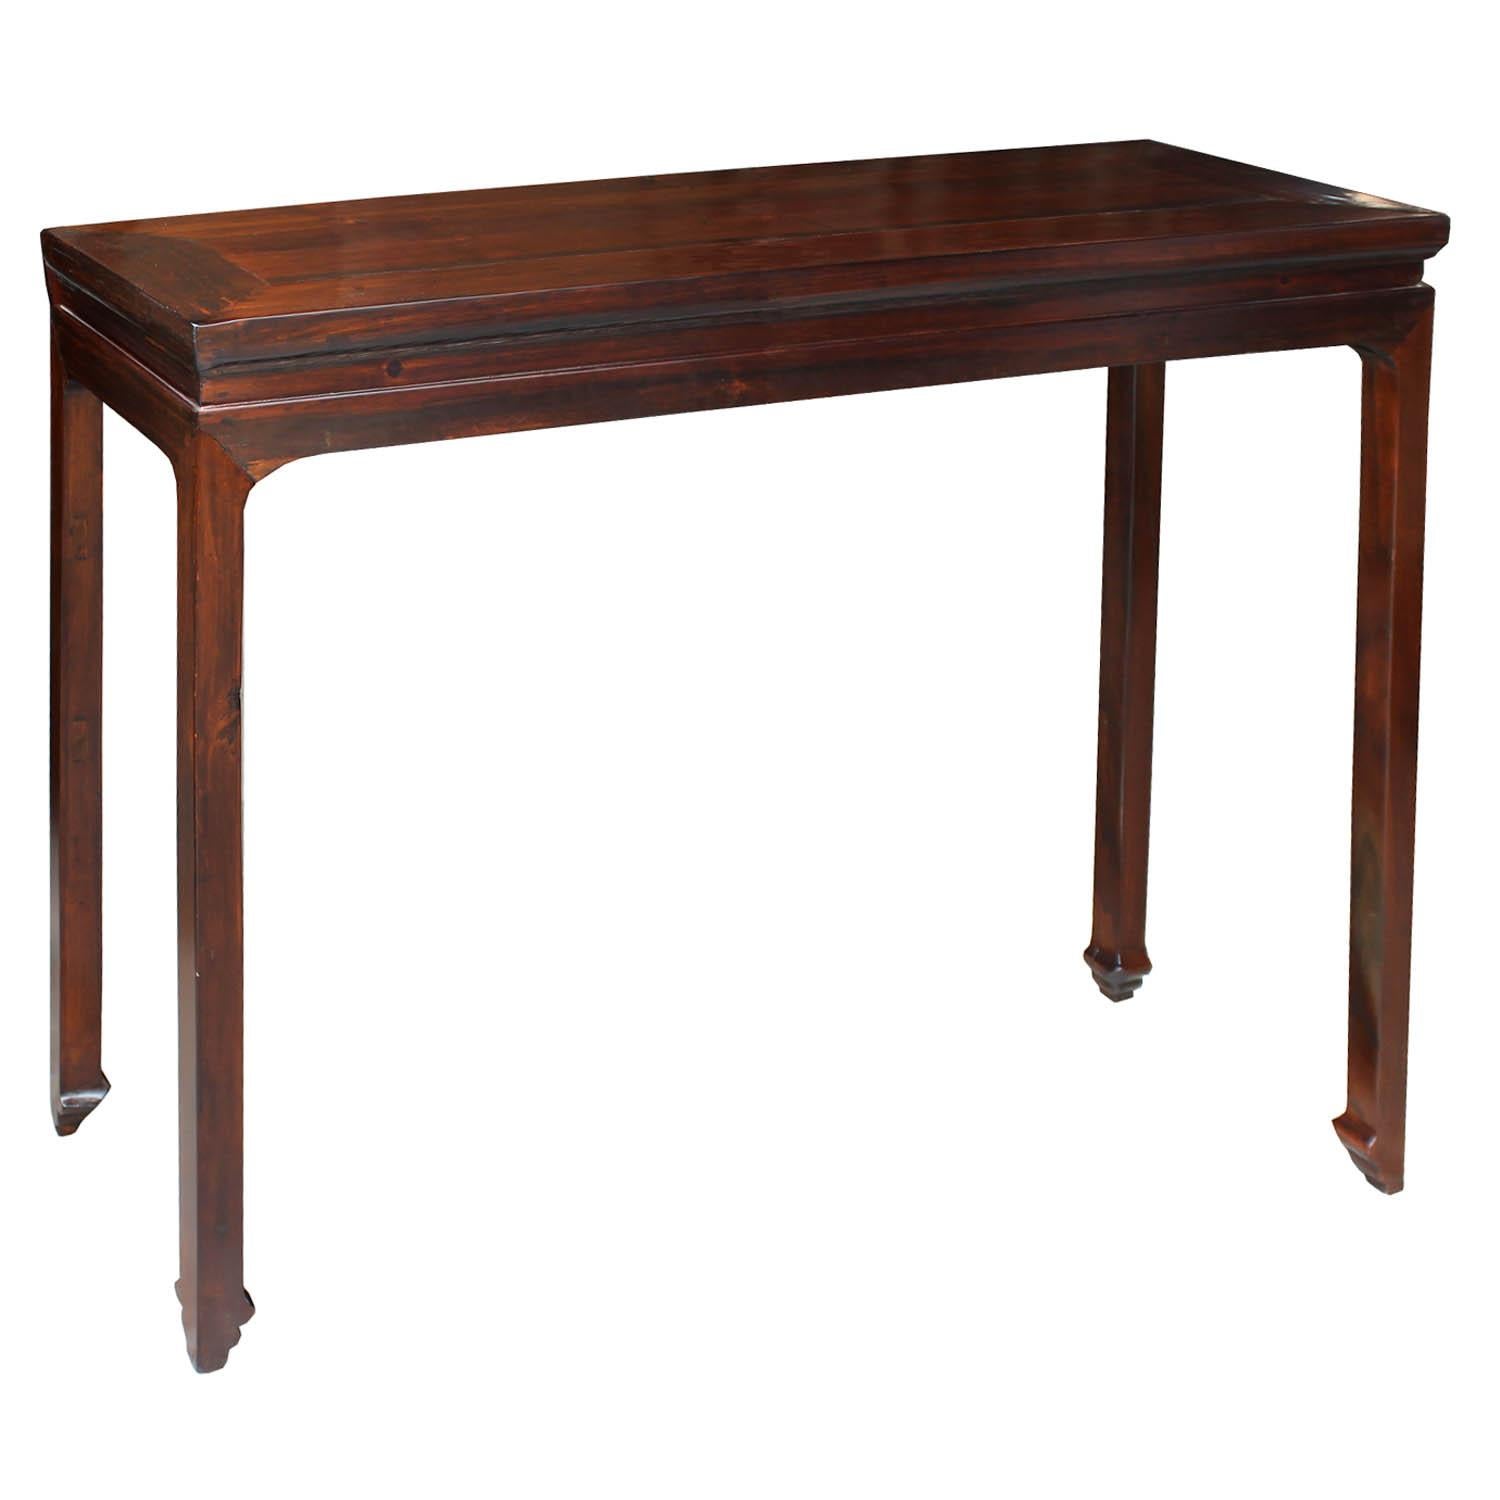 Classic and elegant brown lacquer console table with clean lines can be used in an entry way or behind a sofa. Recessed top with carved feet.